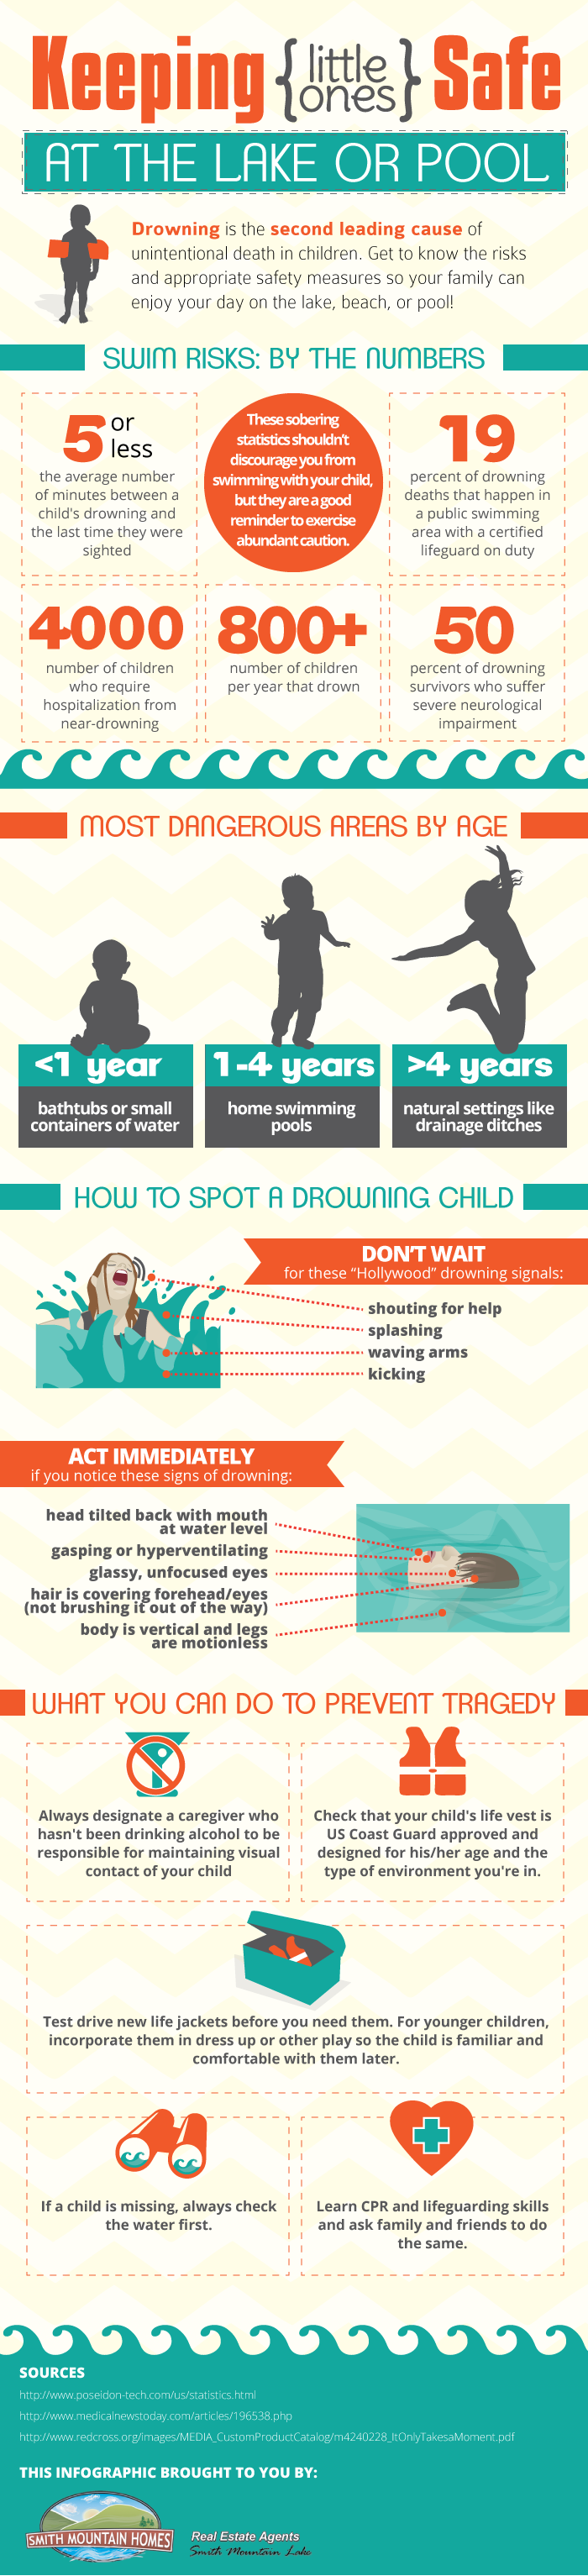 Baby and Toddler Swimming Safety in Lakes and Pools